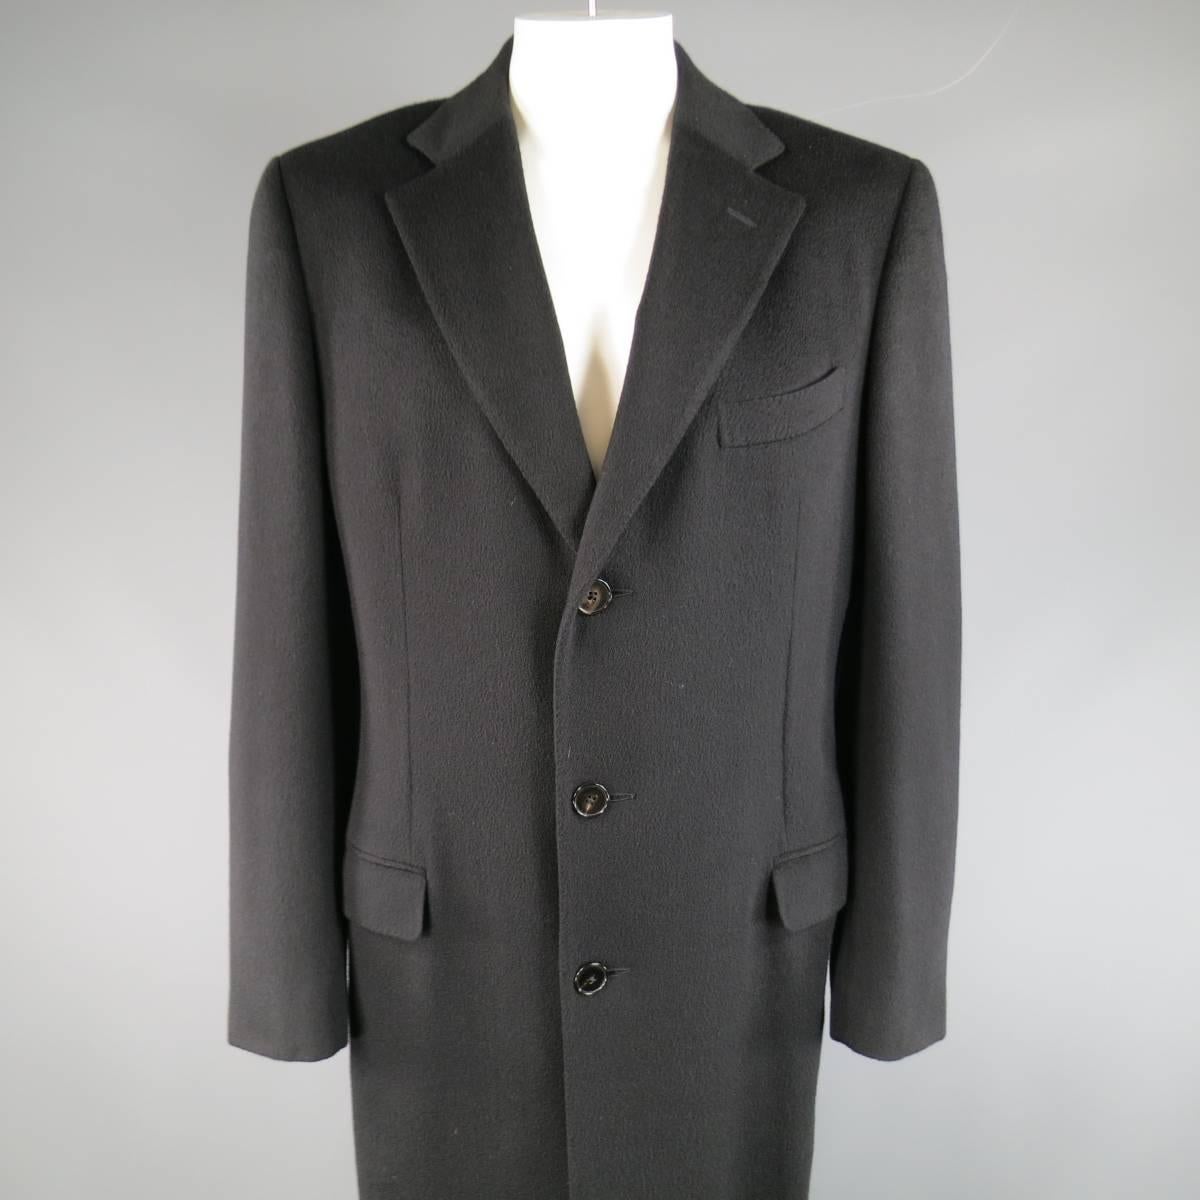 Classic overcoat by ERMENEGILDO ZEGNA in a soft, textured pure cashmere fabric featuring a notch lapel, three button closure, flap pockets, functional button cuffs, and full length hem. Made in Italy.
 
Excellent Pre-Owned Condition.
Marked: IT 54